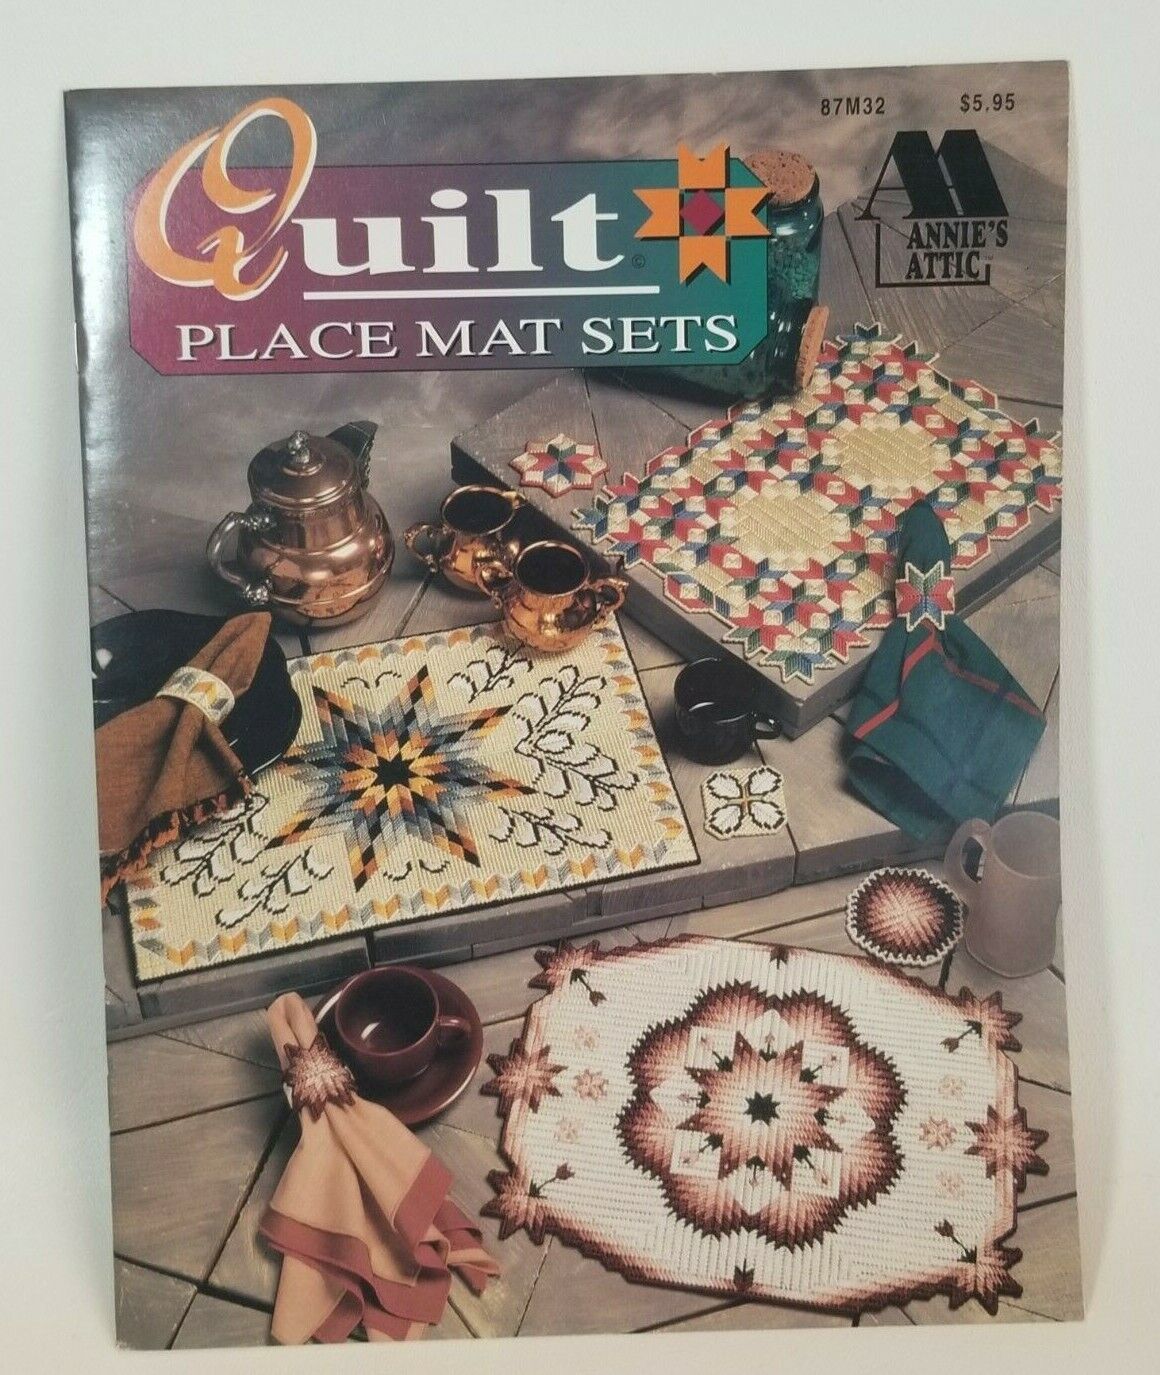 Primary image for Annie's Attic Quilt Placemat Sets Book Leaflet 87M32 Double Wedding Ring Stars 